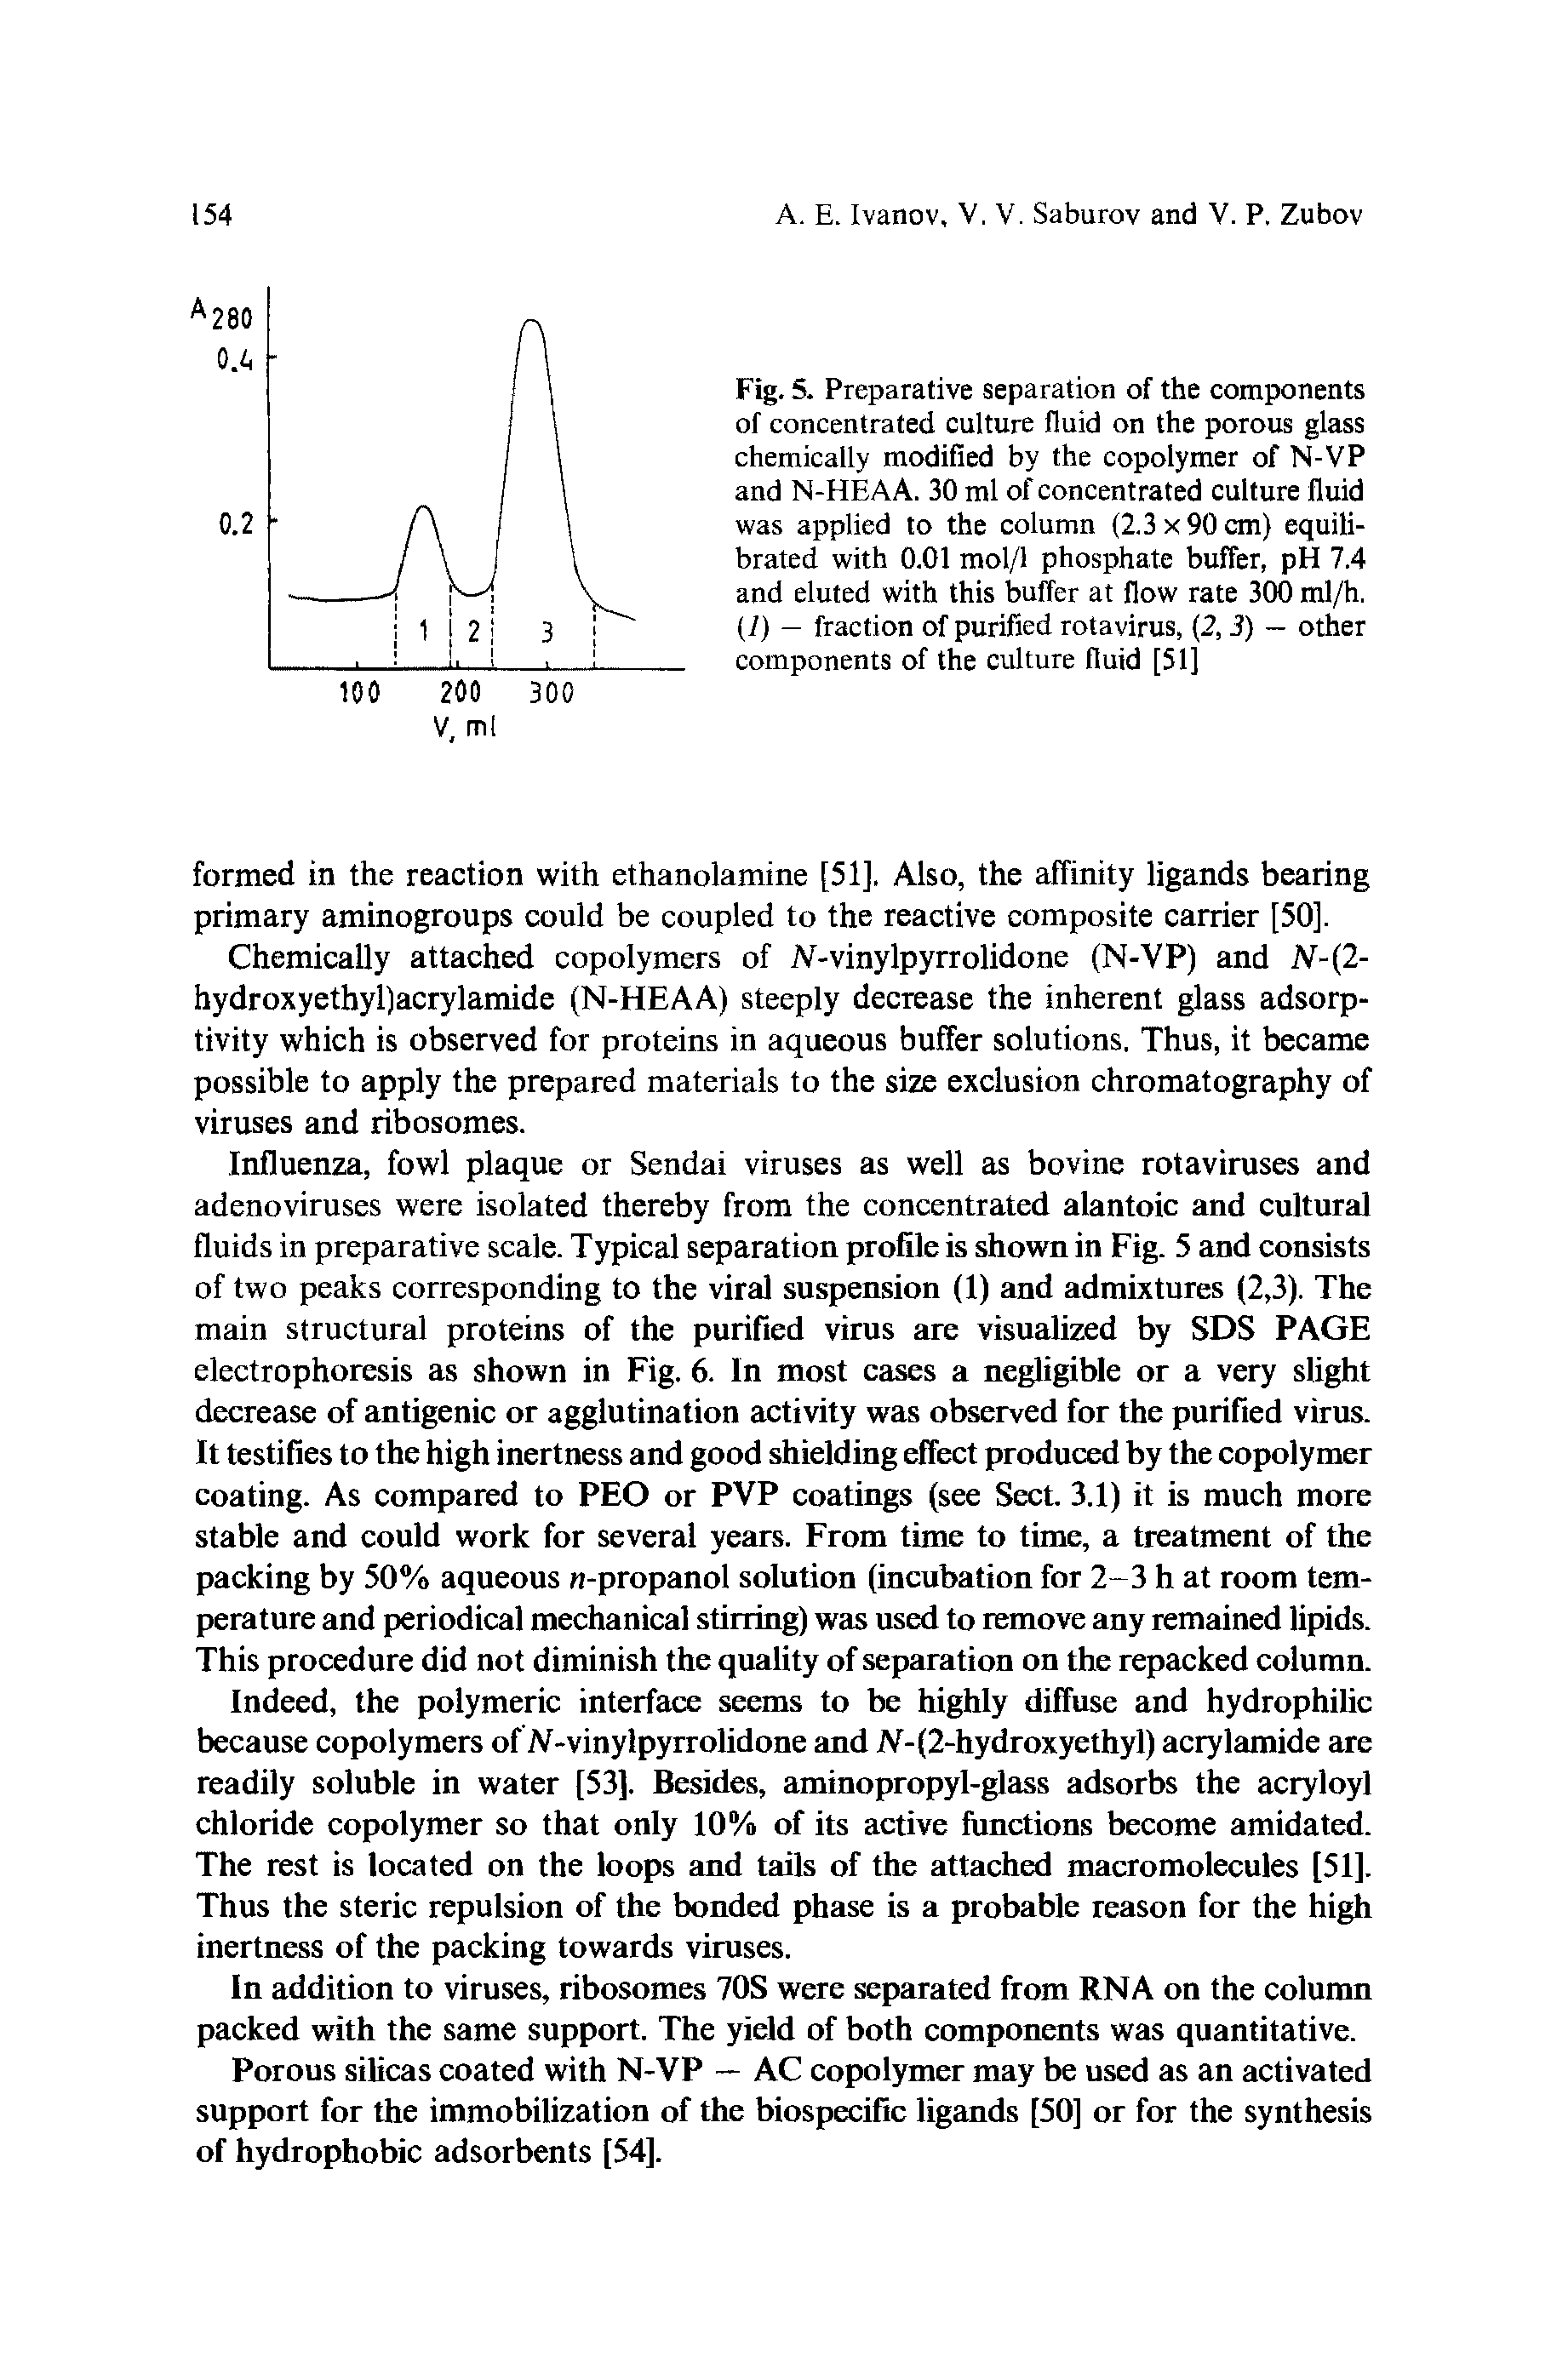 Fig. 5. Preparative separation of the components of concentrated culture fluid on the porous glass chemically modified by the copolymer of N-VP and N-HEAA. 30 ml of concentrated culture fluid was applied to the column (2.3x90 cm) equilibrated with 0.01 mol/1 phosphate buffer, pH 7.4 and eluted with this buffer at flow rate 300 ml/h. (1) — fraction of purified rotavirus, (2, 3) — other components of the culture fluid [51]...